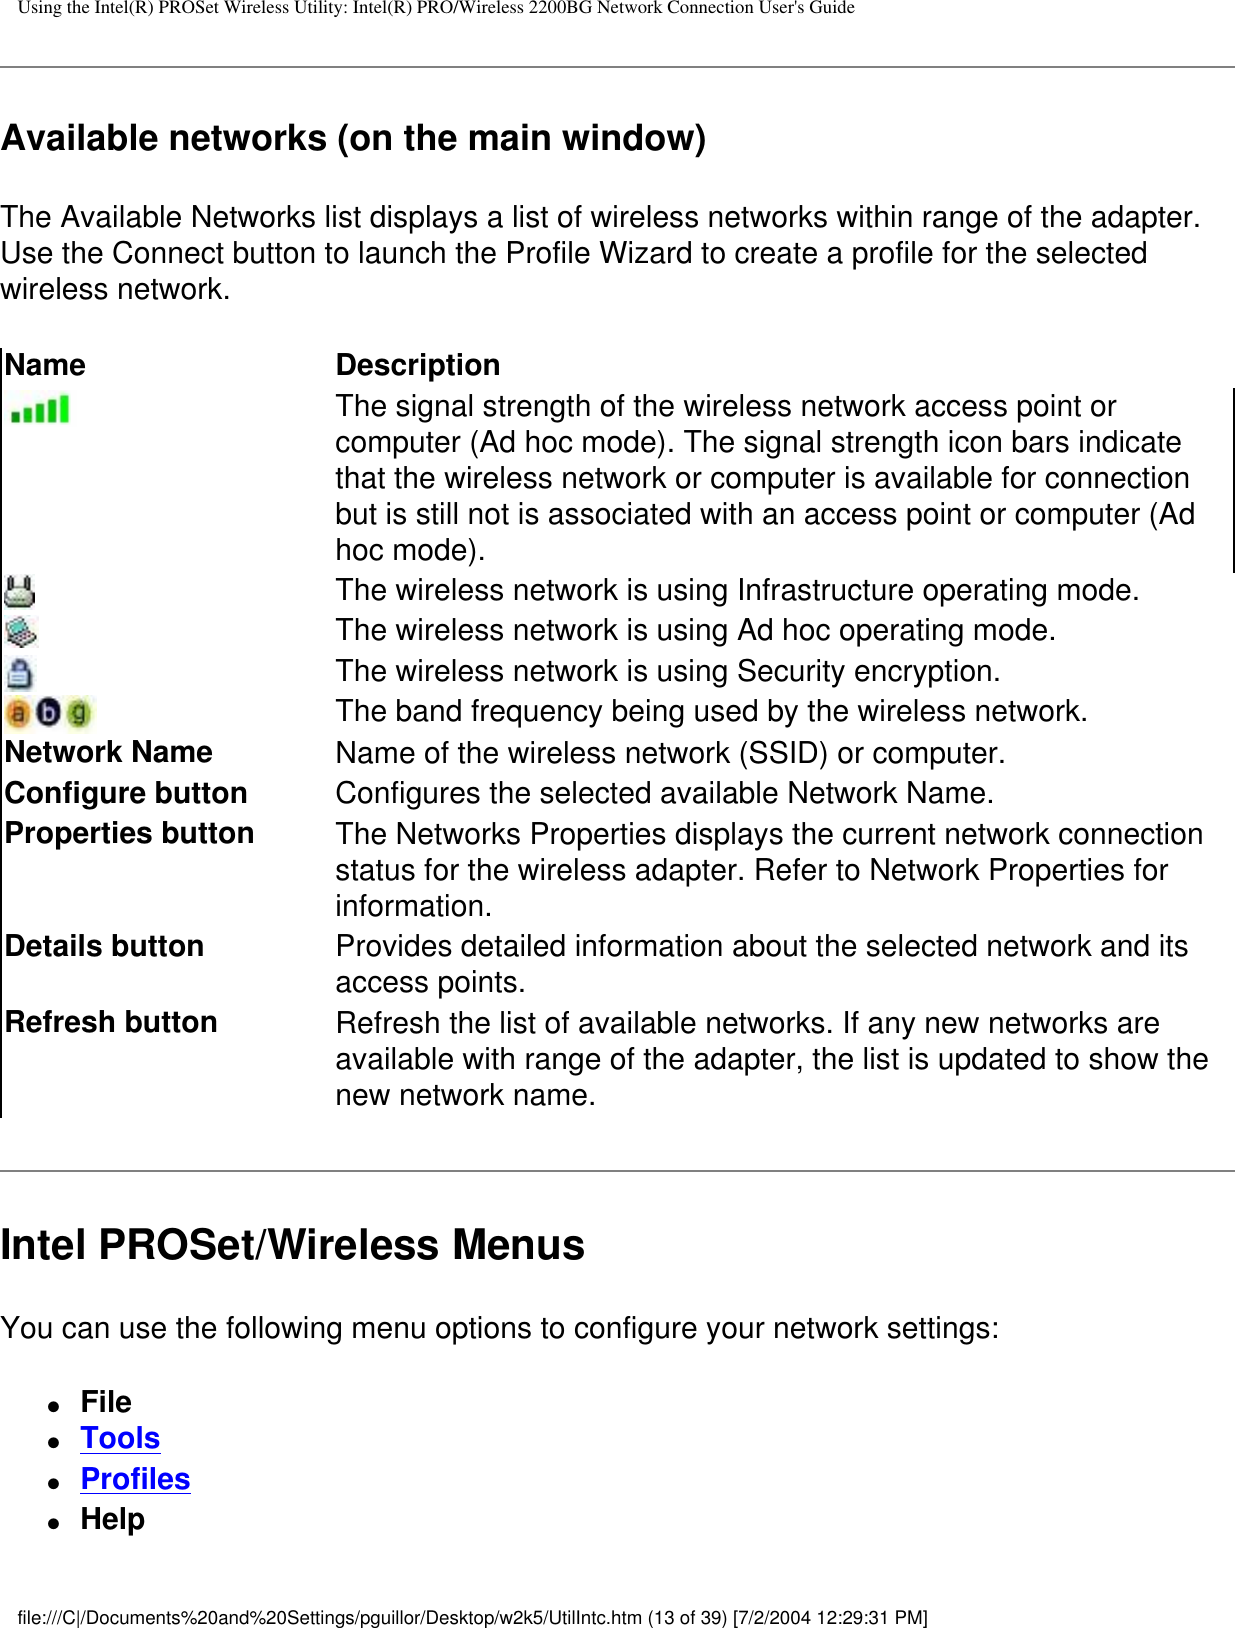 Using the Intel(R) PROSet Wireless Utility: Intel(R) PRO/Wireless 2200BG Network Connection User&apos;s GuideAvailable networks (on the main window)The Available Networks list displays a list of wireless networks within range of the adapter. Use the Connect button to launch the Profile Wizard to create a profile for the selected wireless network. Name DescriptionThe signal strength of the wireless network access point or computer (Ad hoc mode). The signal strength icon bars indicate that the wireless network or computer is available for connection but is still not is associated with an access point or computer (Ad hoc mode).The wireless network is using Infrastructure operating mode. The wireless network is using Ad hoc operating mode.The wireless network is using Security encryption.The band frequency being used by the wireless network.Network Name Name of the wireless network (SSID) or computer.Configure button  Configures the selected available Network Name.Properties button The Networks Properties displays the current network connection status for the wireless adapter. Refer to Network Properties for information.Details button Provides detailed information about the selected network and its access points.Refresh button Refresh the list of available networks. If any new networks are available with range of the adapter, the list is updated to show the new network name.  Intel PROSet/Wireless MenusYou can use the following menu options to configure your network settings:●     File ●     Tools●     Profiles●     Helpfile:///C|/Documents%20and%20Settings/pguillor/Desktop/w2k5/UtilIntc.htm (13 of 39) [7/2/2004 12:29:31 PM]